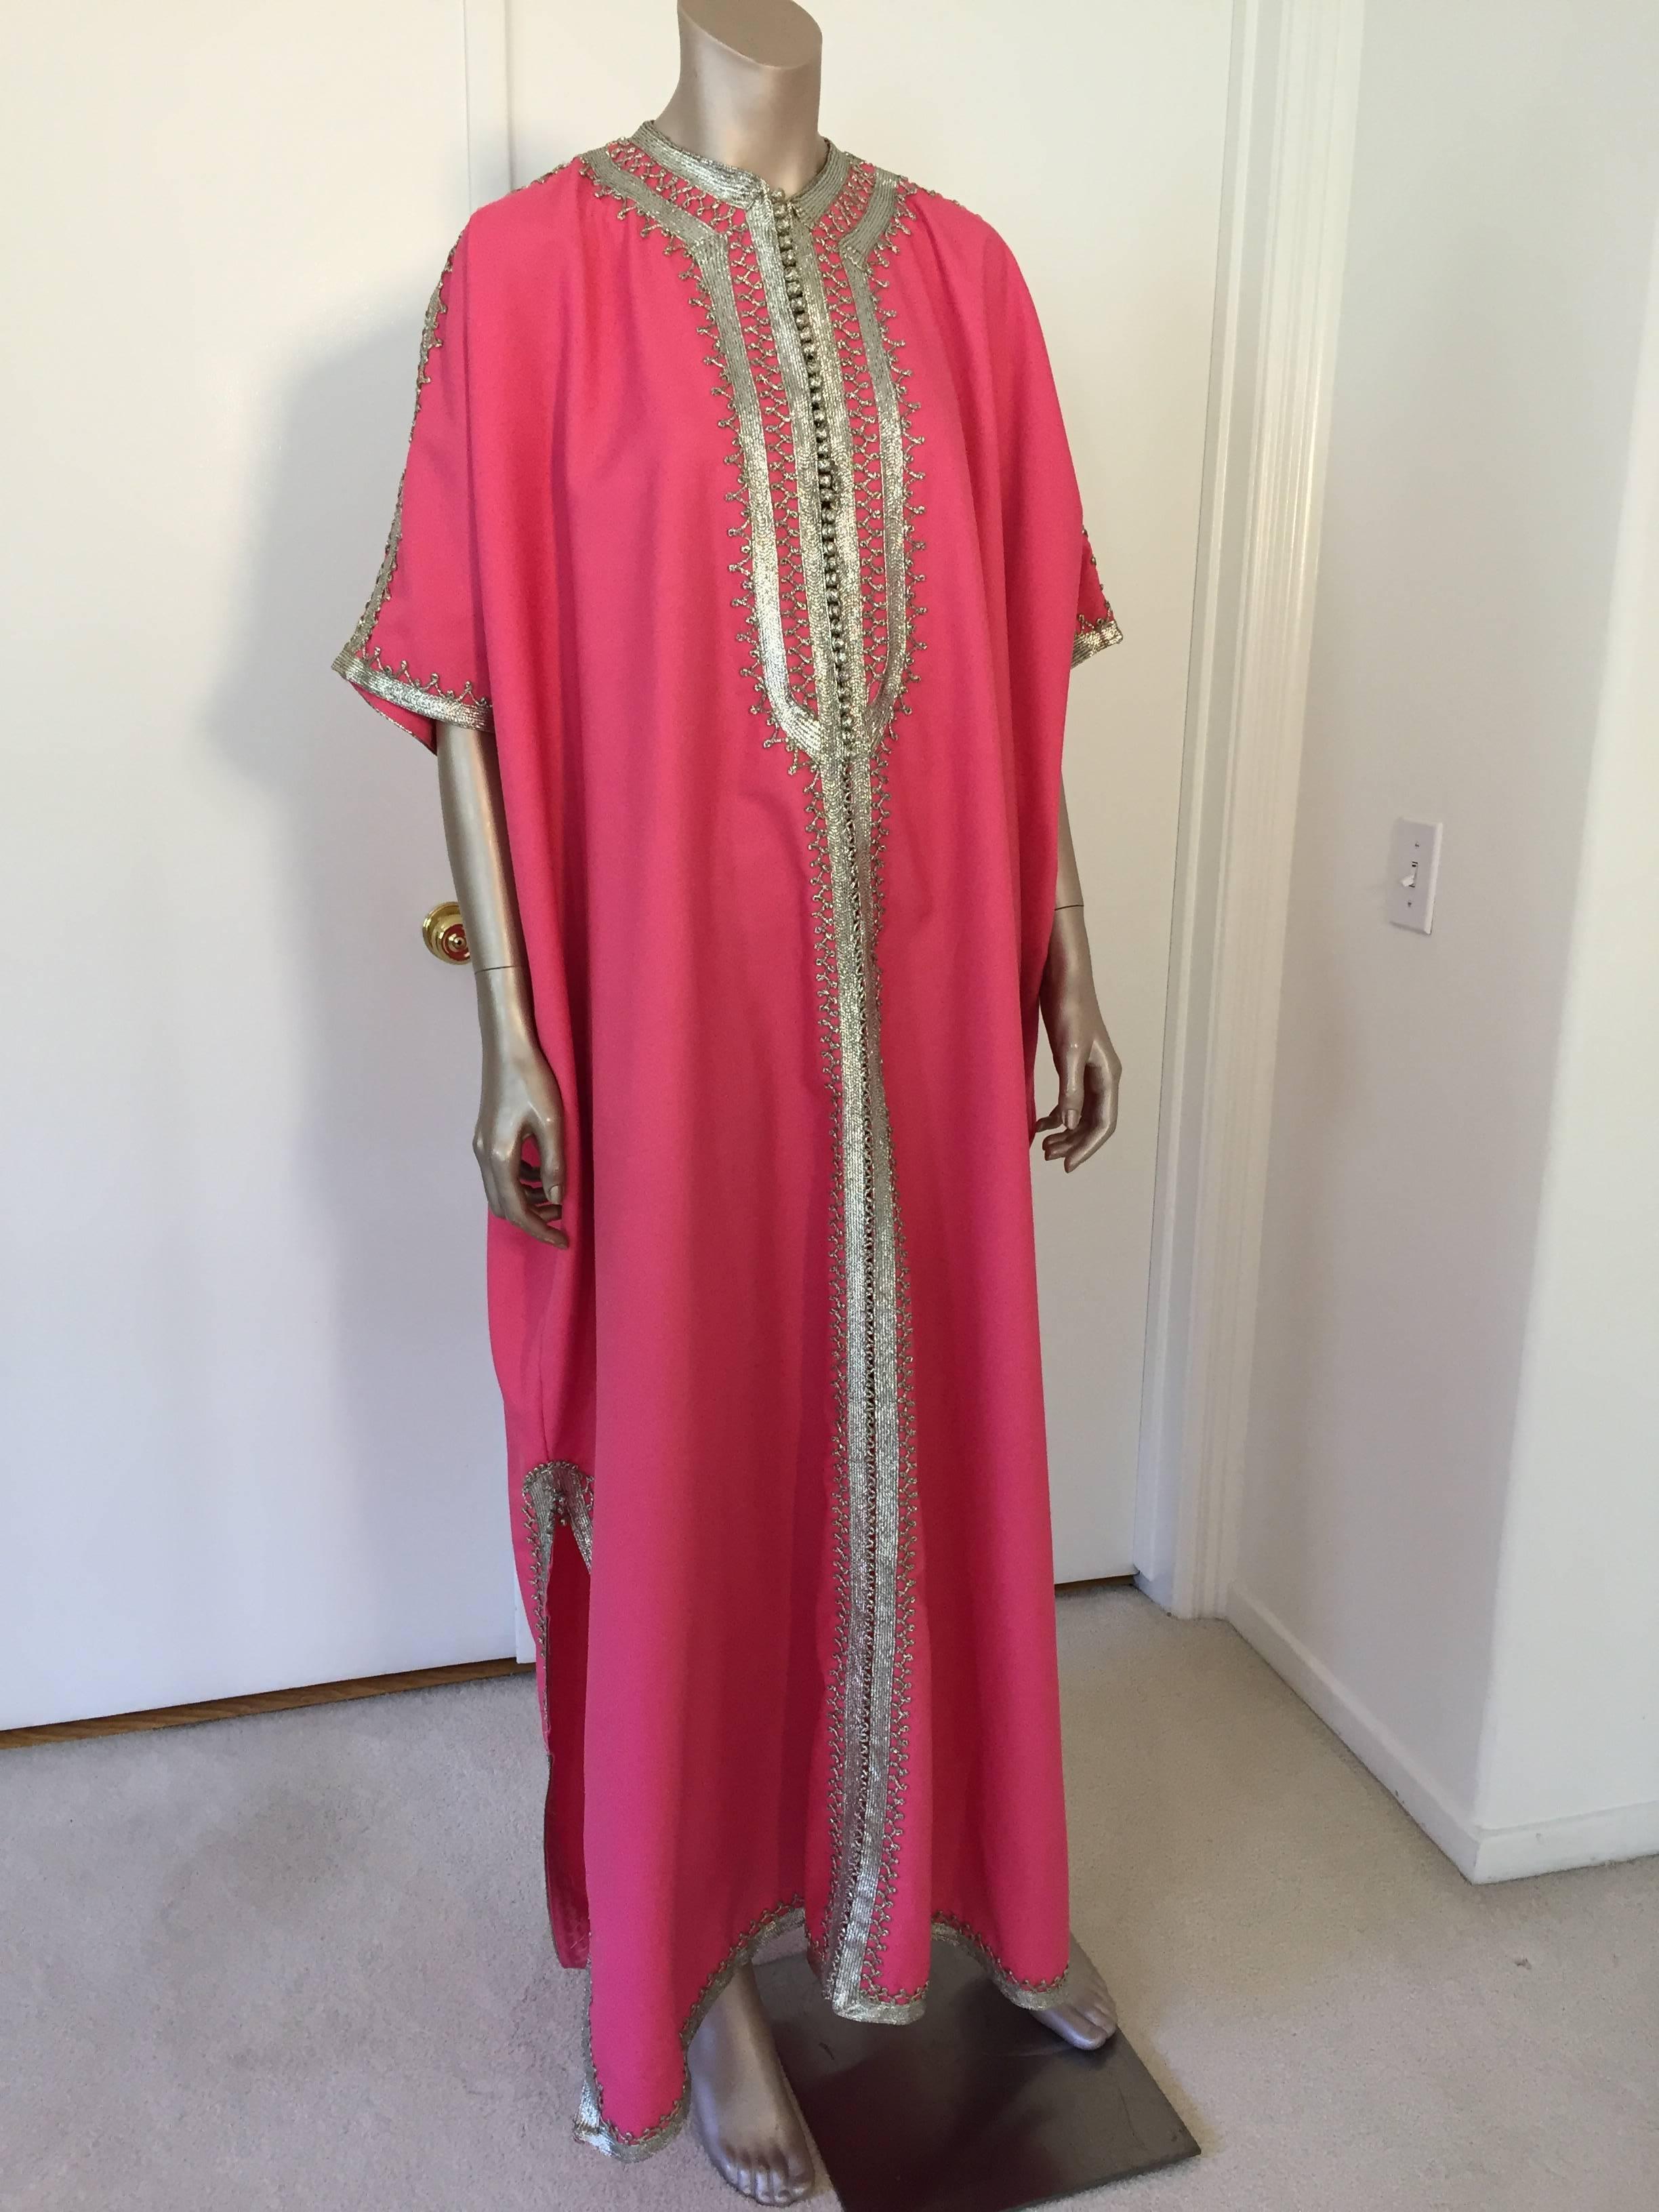 Elegant Moroccan caftan hot pink color embroidered with silver, circa 1970s. 
This long maxi poly jersey dress kaftan is embroidered and embellished with traditional designs in silver.
One of a kind evening vintage Moroccan Middle Eastern hostess